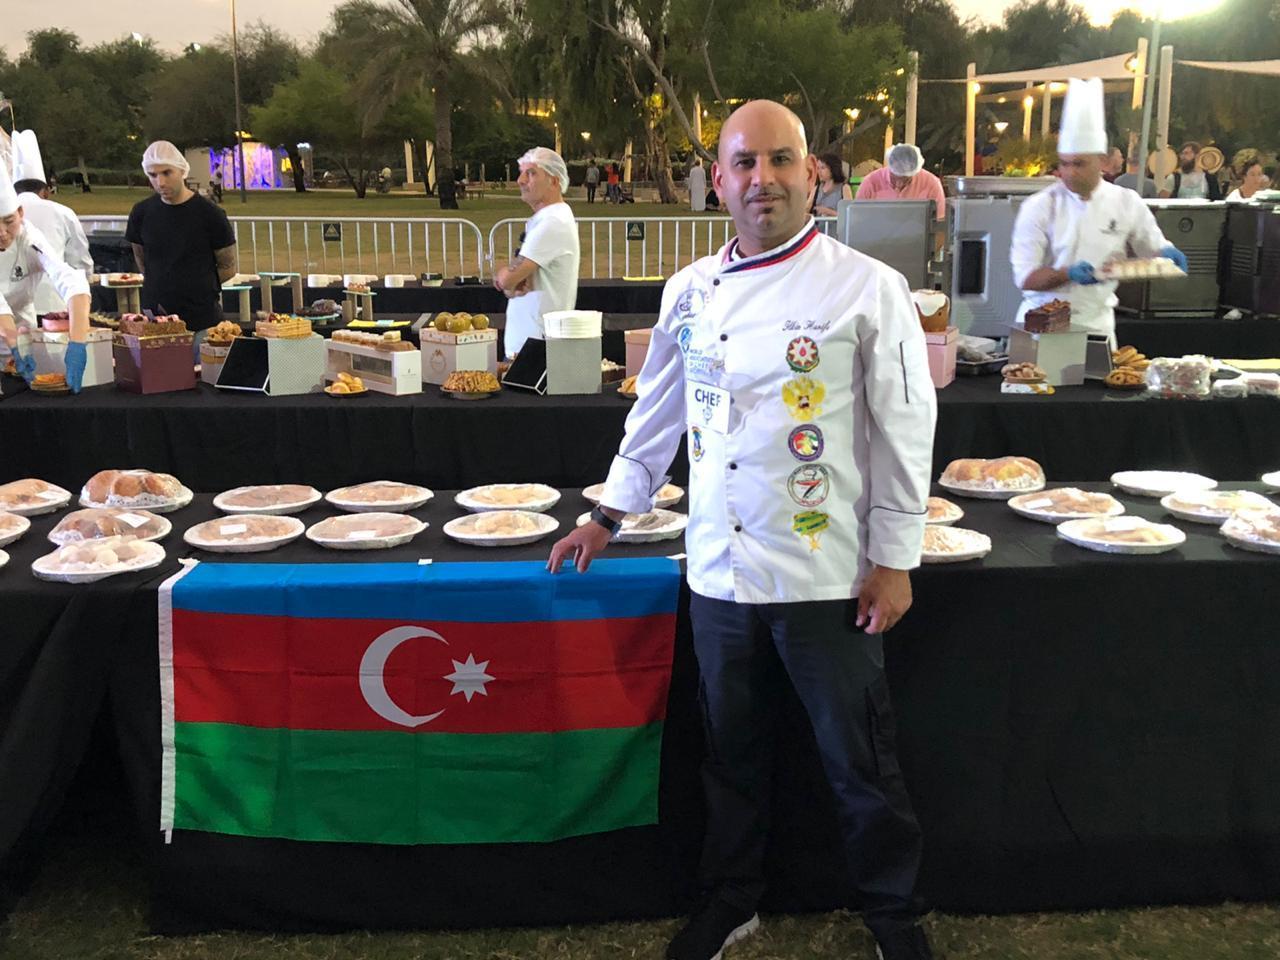 National pastries enjoy great success in Abu Dhabi [PHOTO/VIDEO]